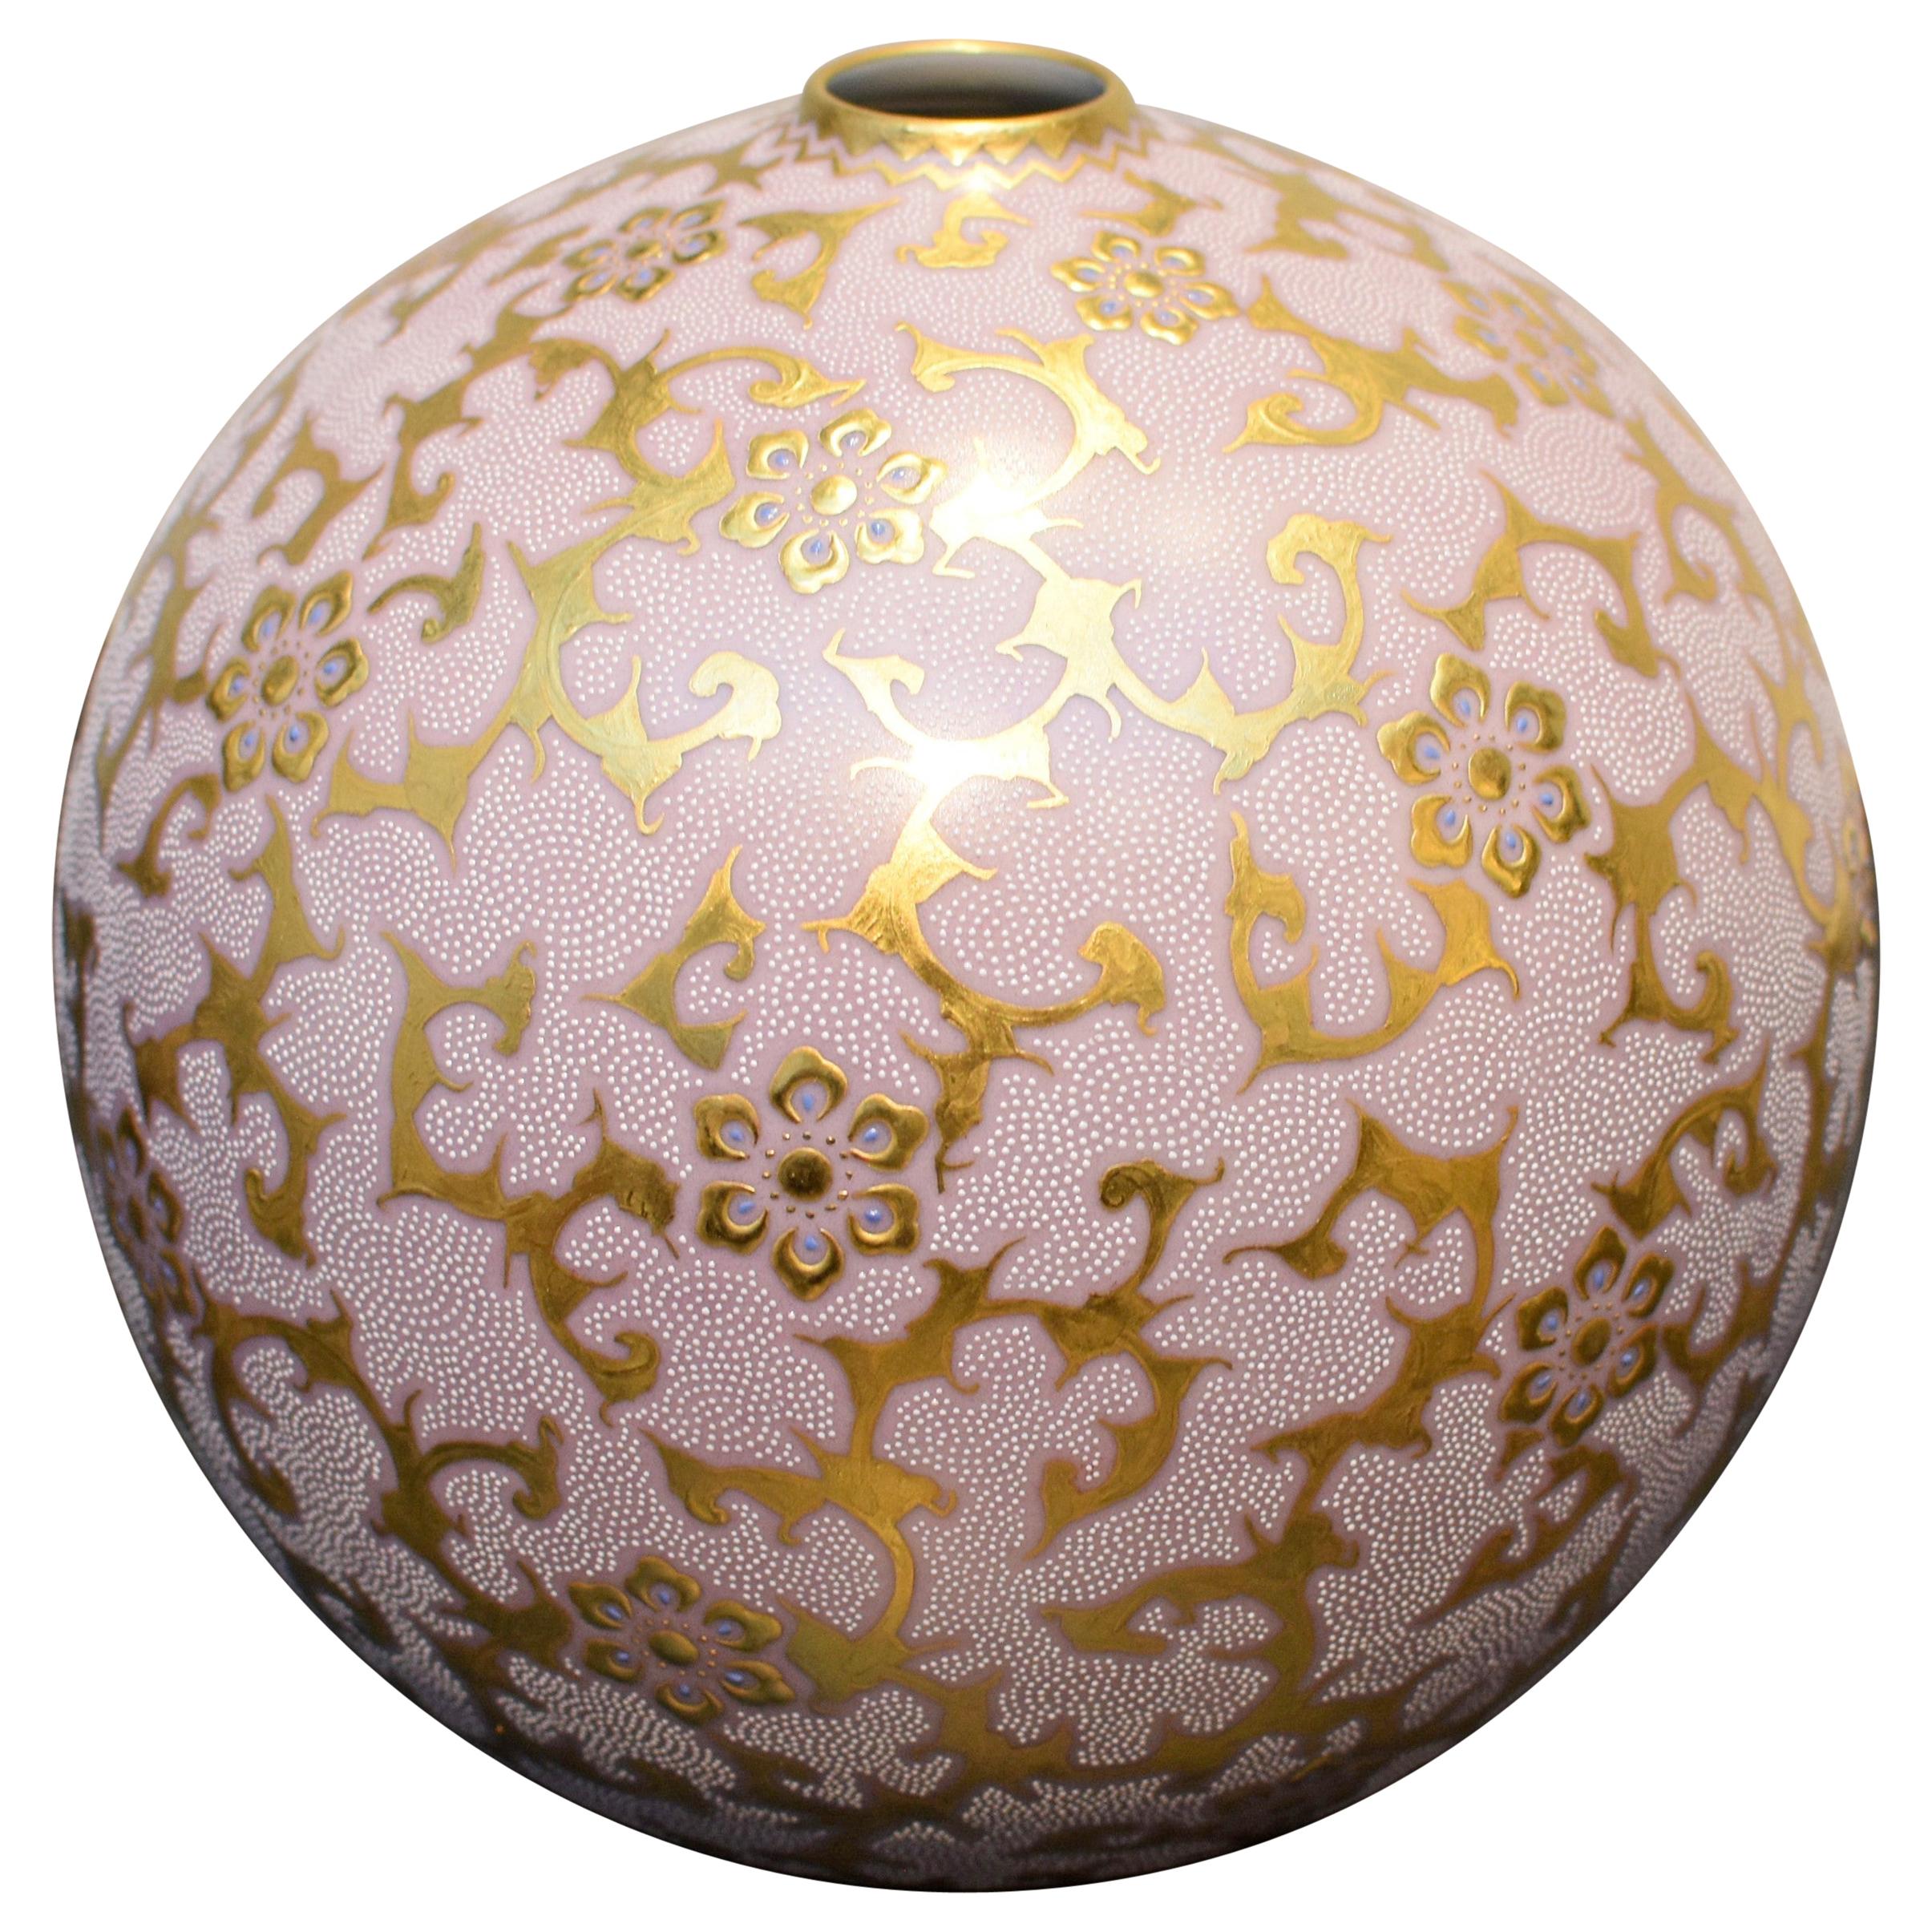 Contemporary Pink Pure Gold Porcelain Vase by Japanese Master Artist